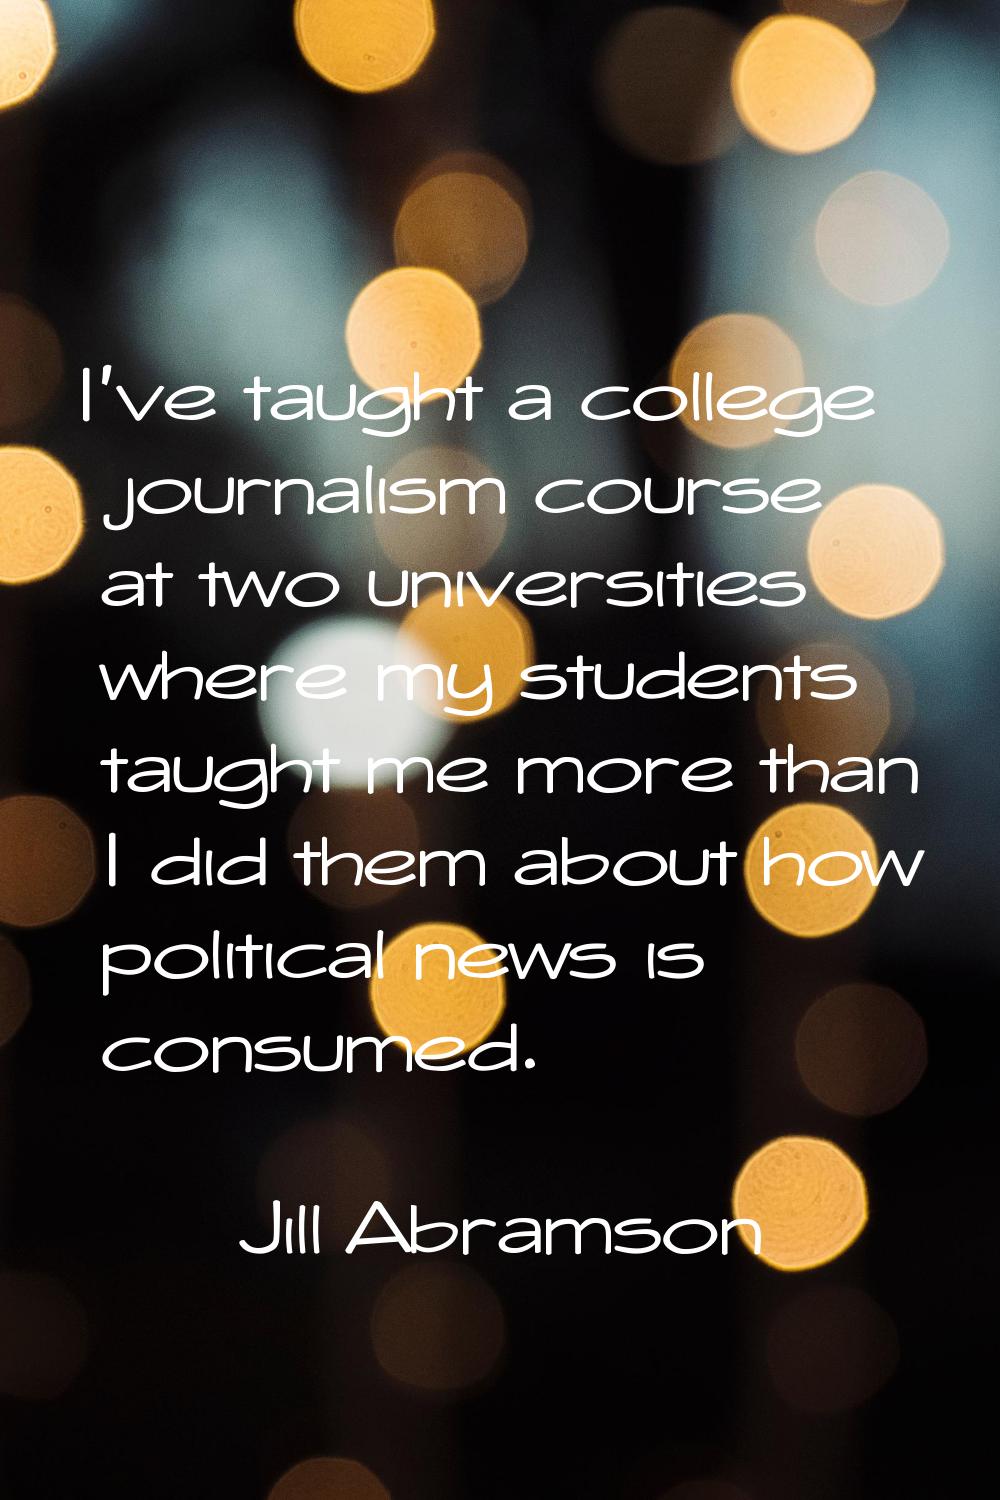 I've taught a college journalism course at two universities where my students taught me more than I